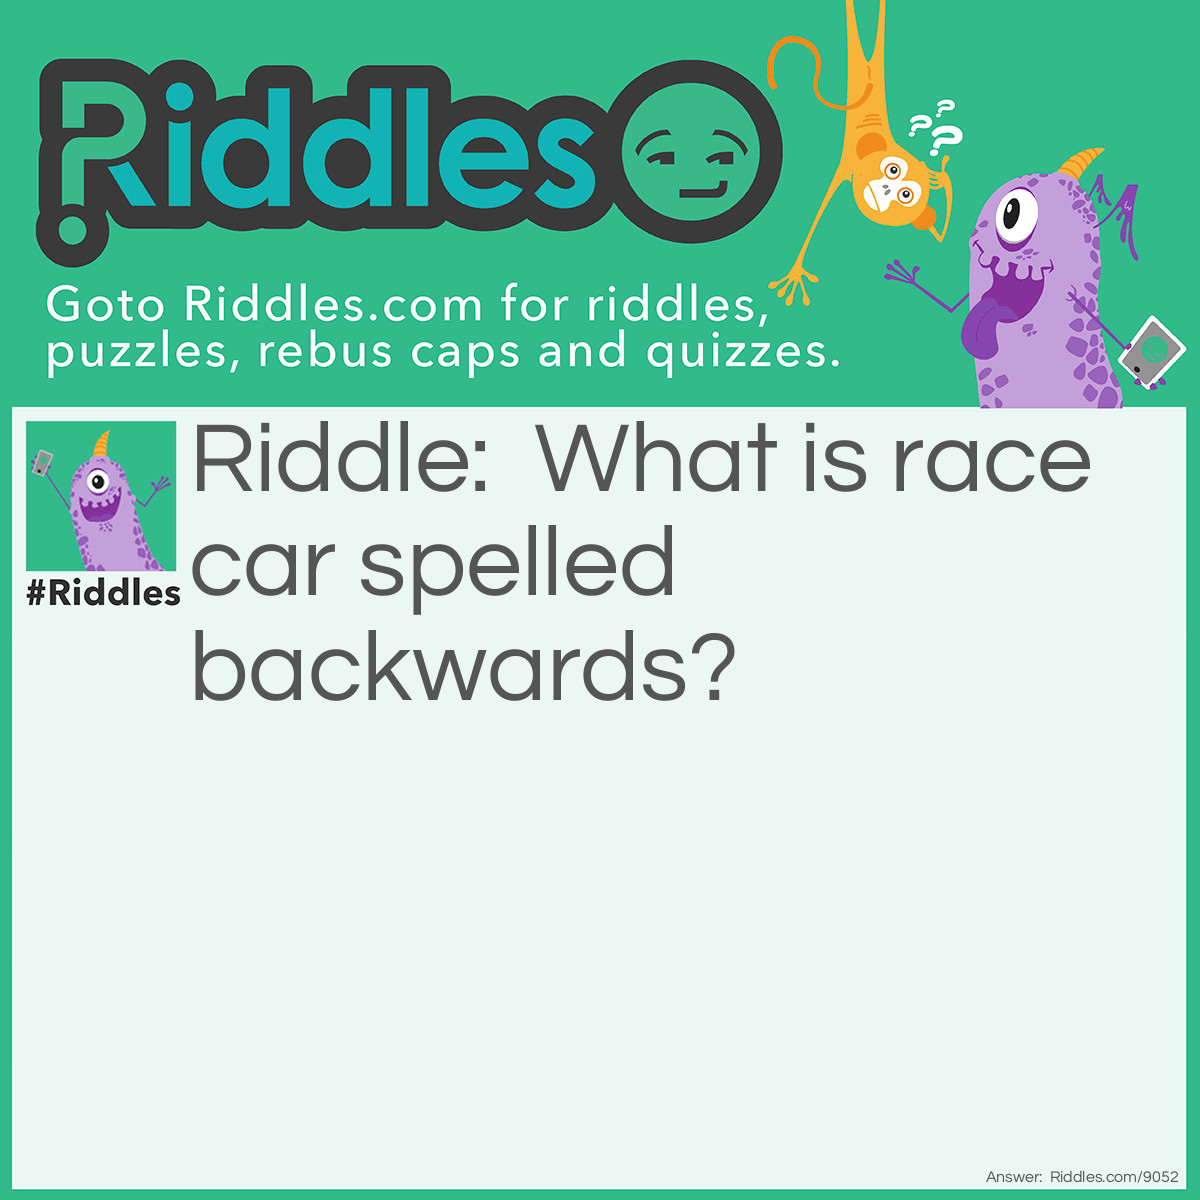 Riddle: What is race car spelled backwards? Answer: Race car.